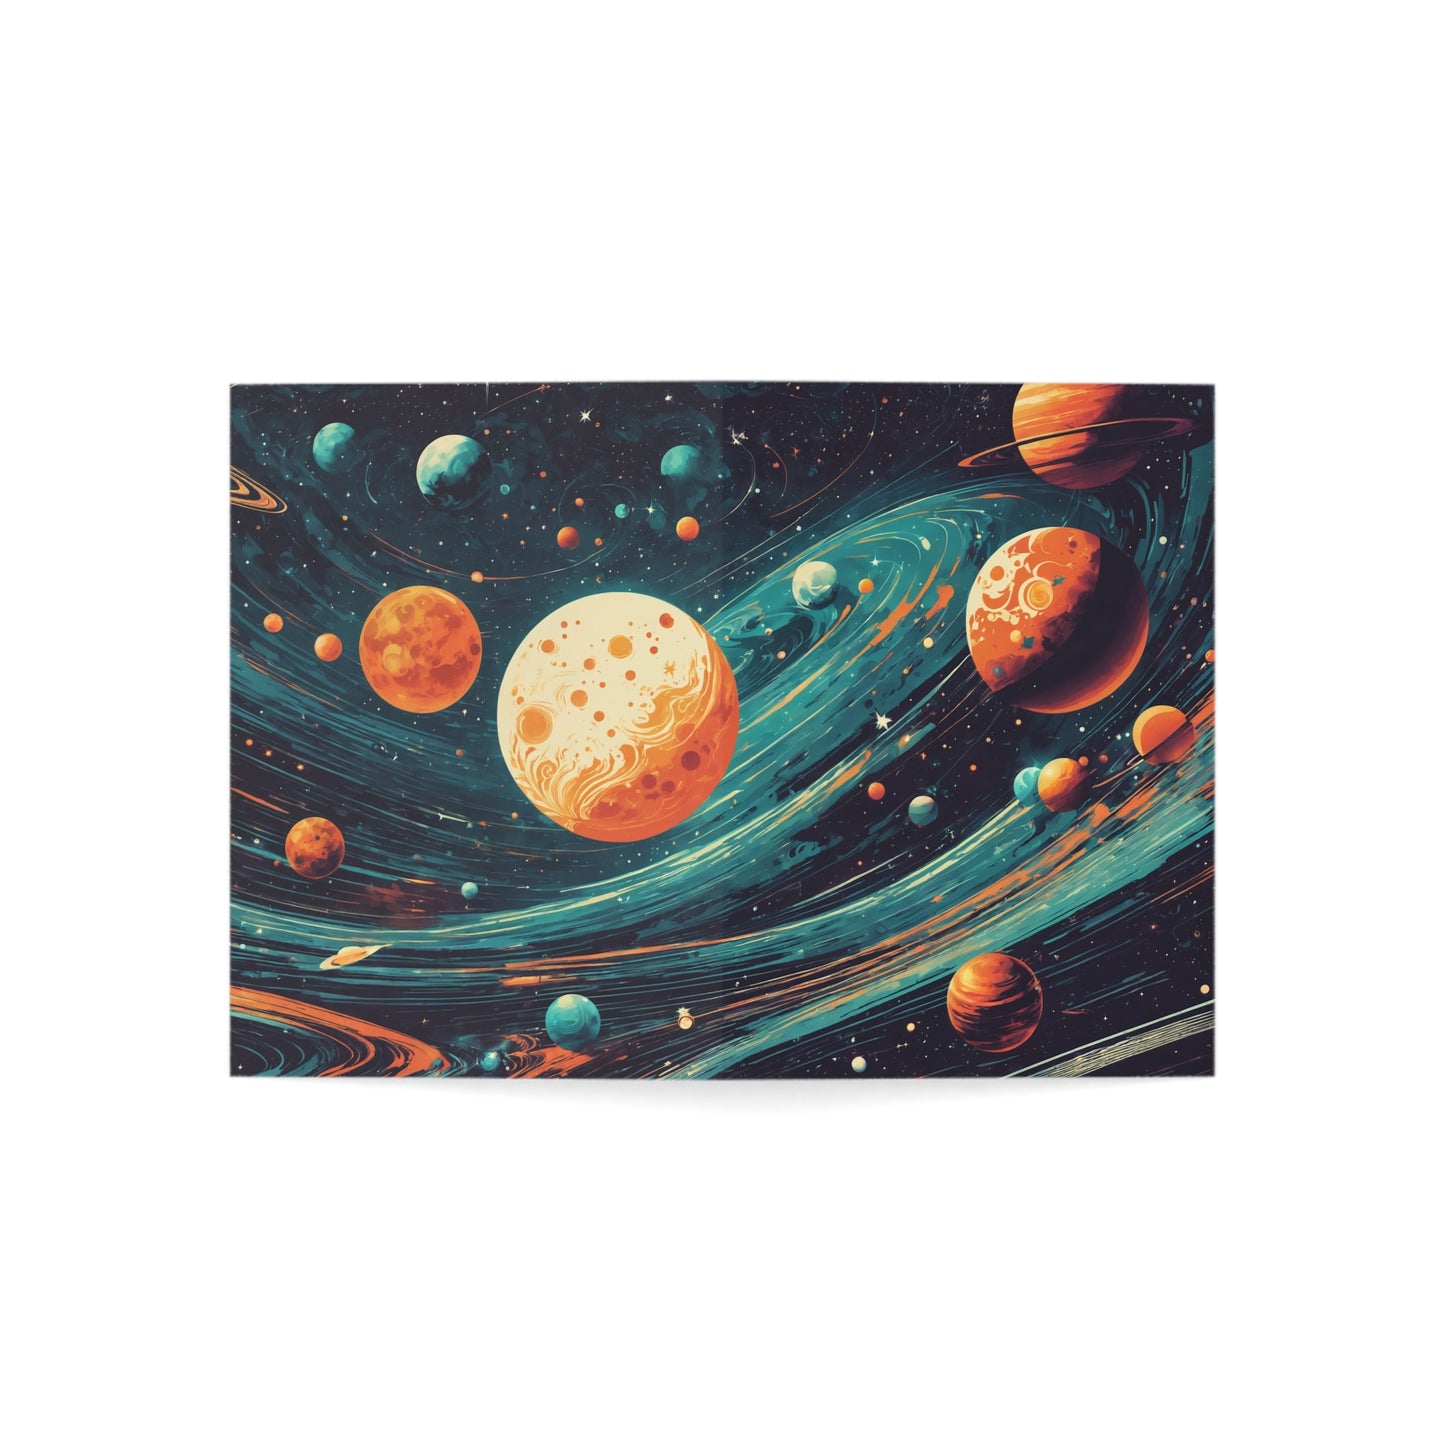 Space Edition | Greeting Cards (1, 10, 30, and 50pcs)